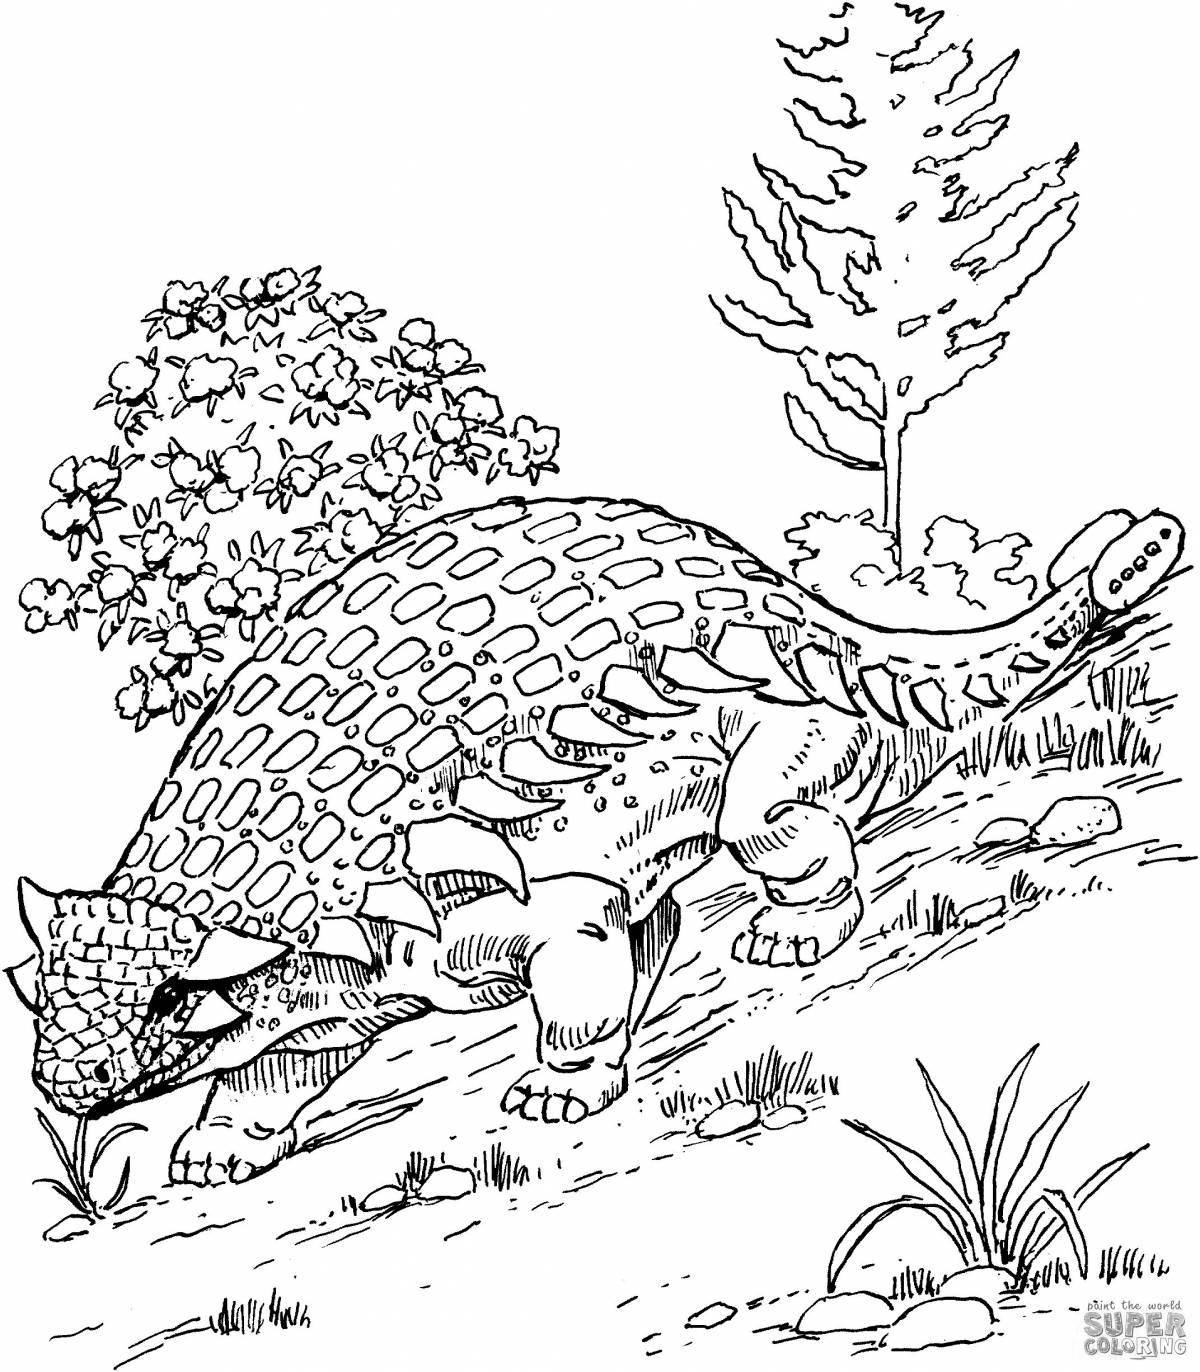 Funny Ankylosaurus coloring book for kids